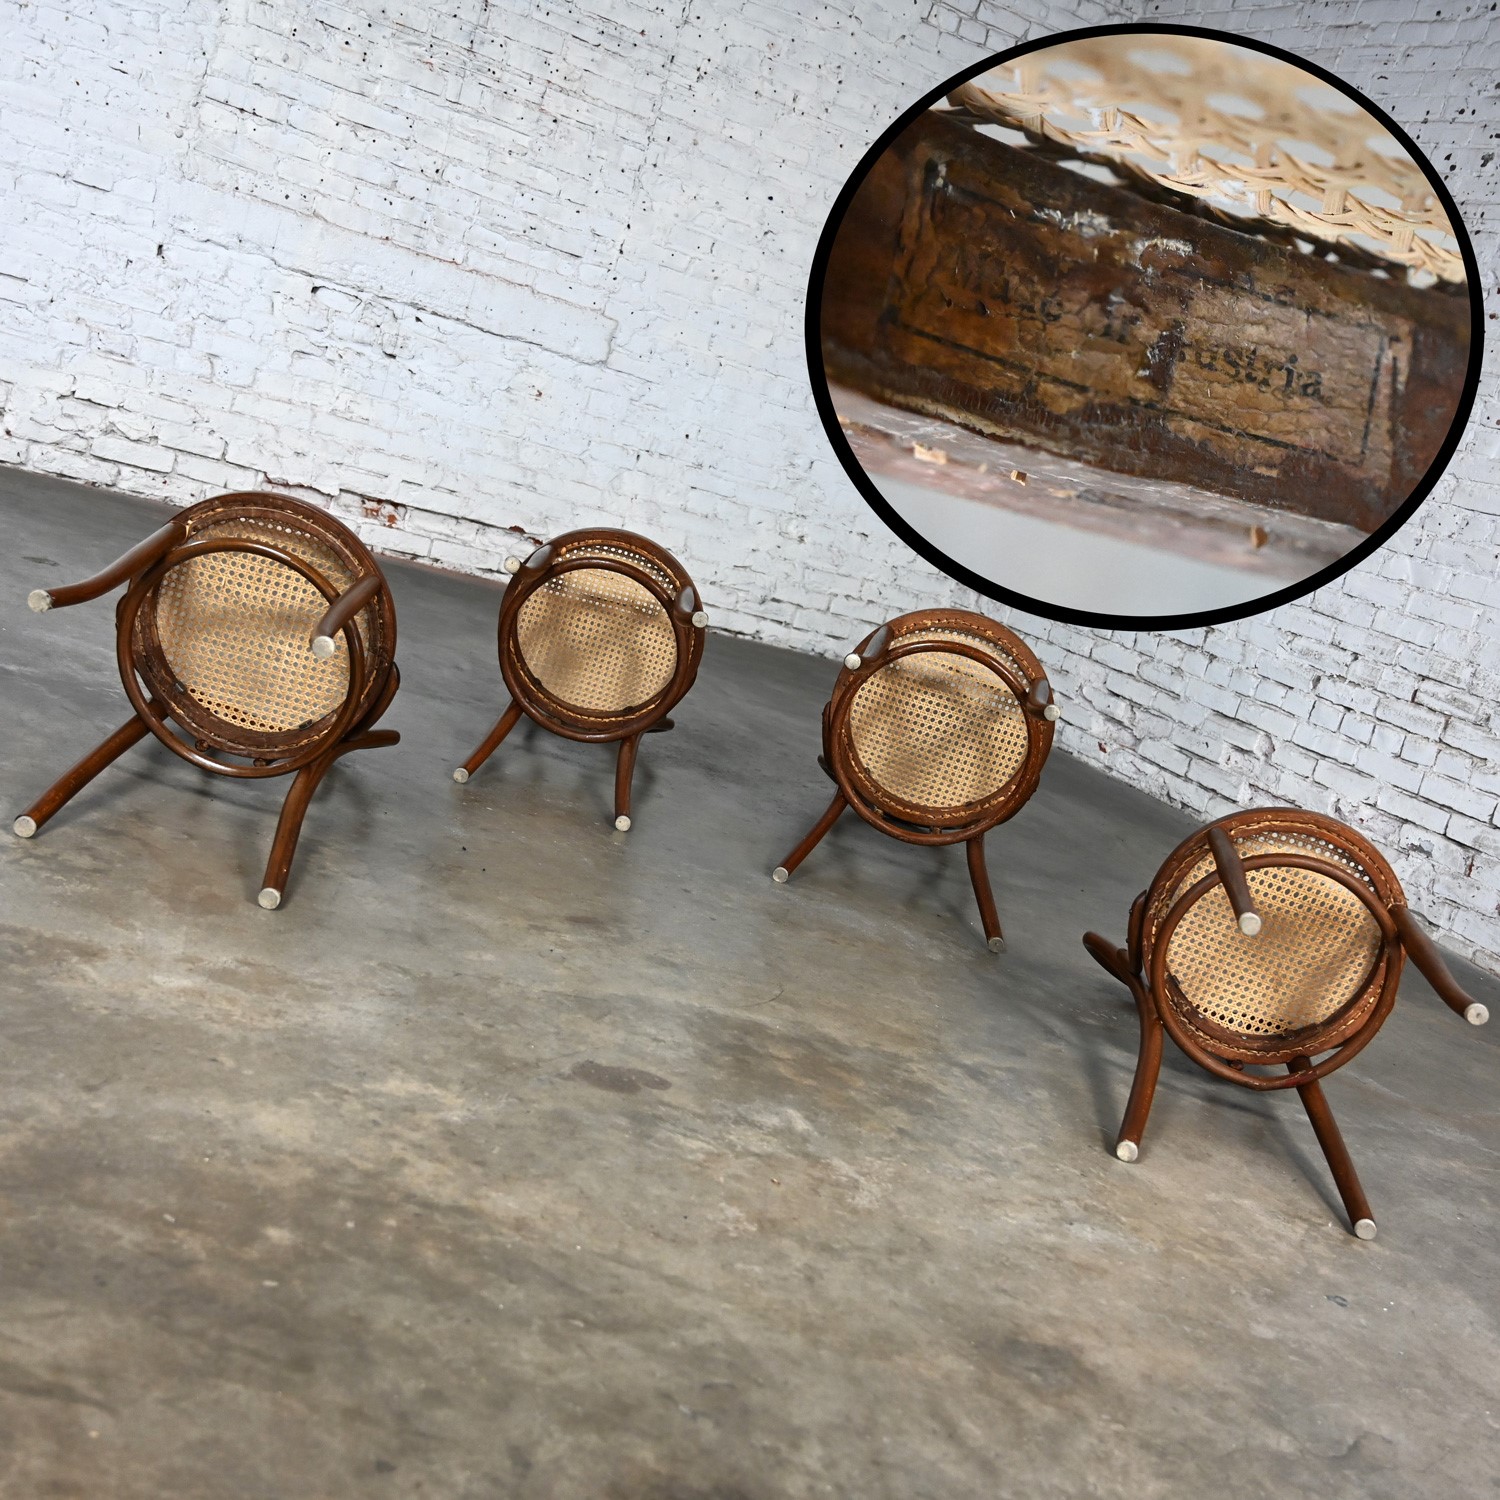 Four Late 19th to Early 20th Century Bauhaus Style #18 Café Chairs by Thonet Bentwood Frames & Hand Caned Seats